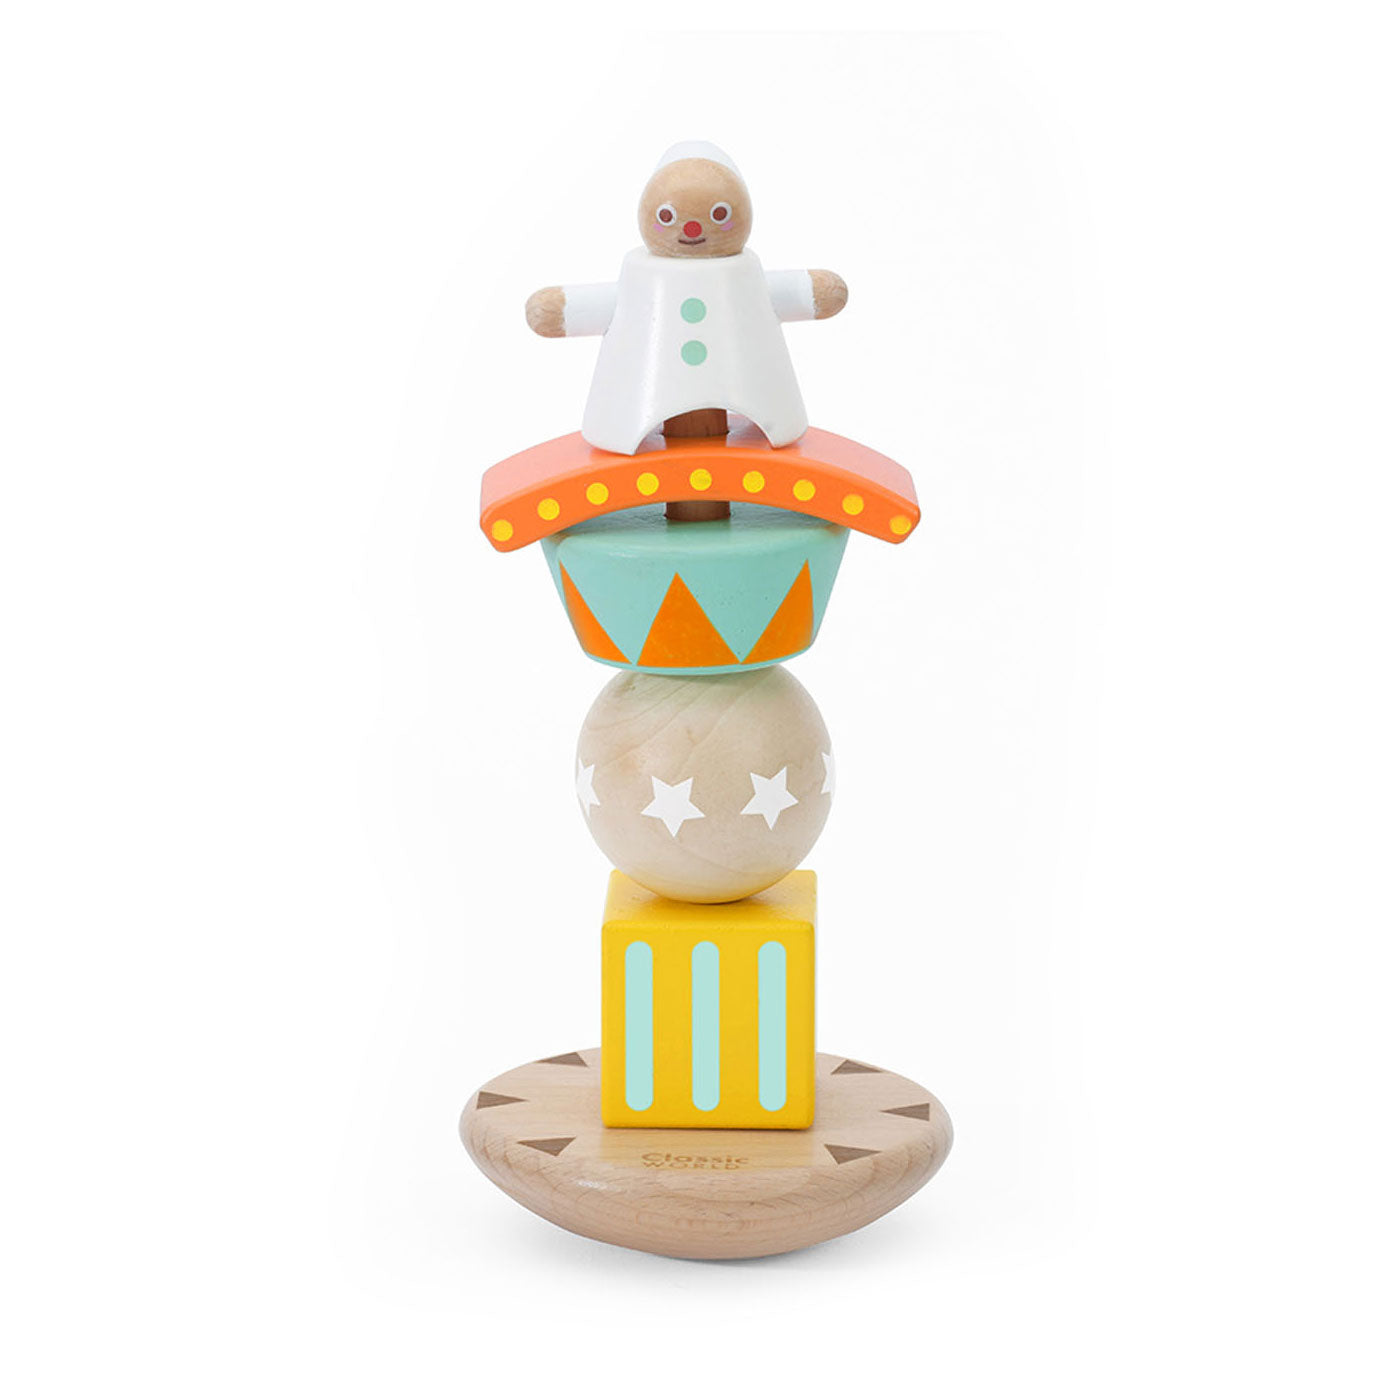 Classic World Wooden Stack and Balance Game Clown 6pcs